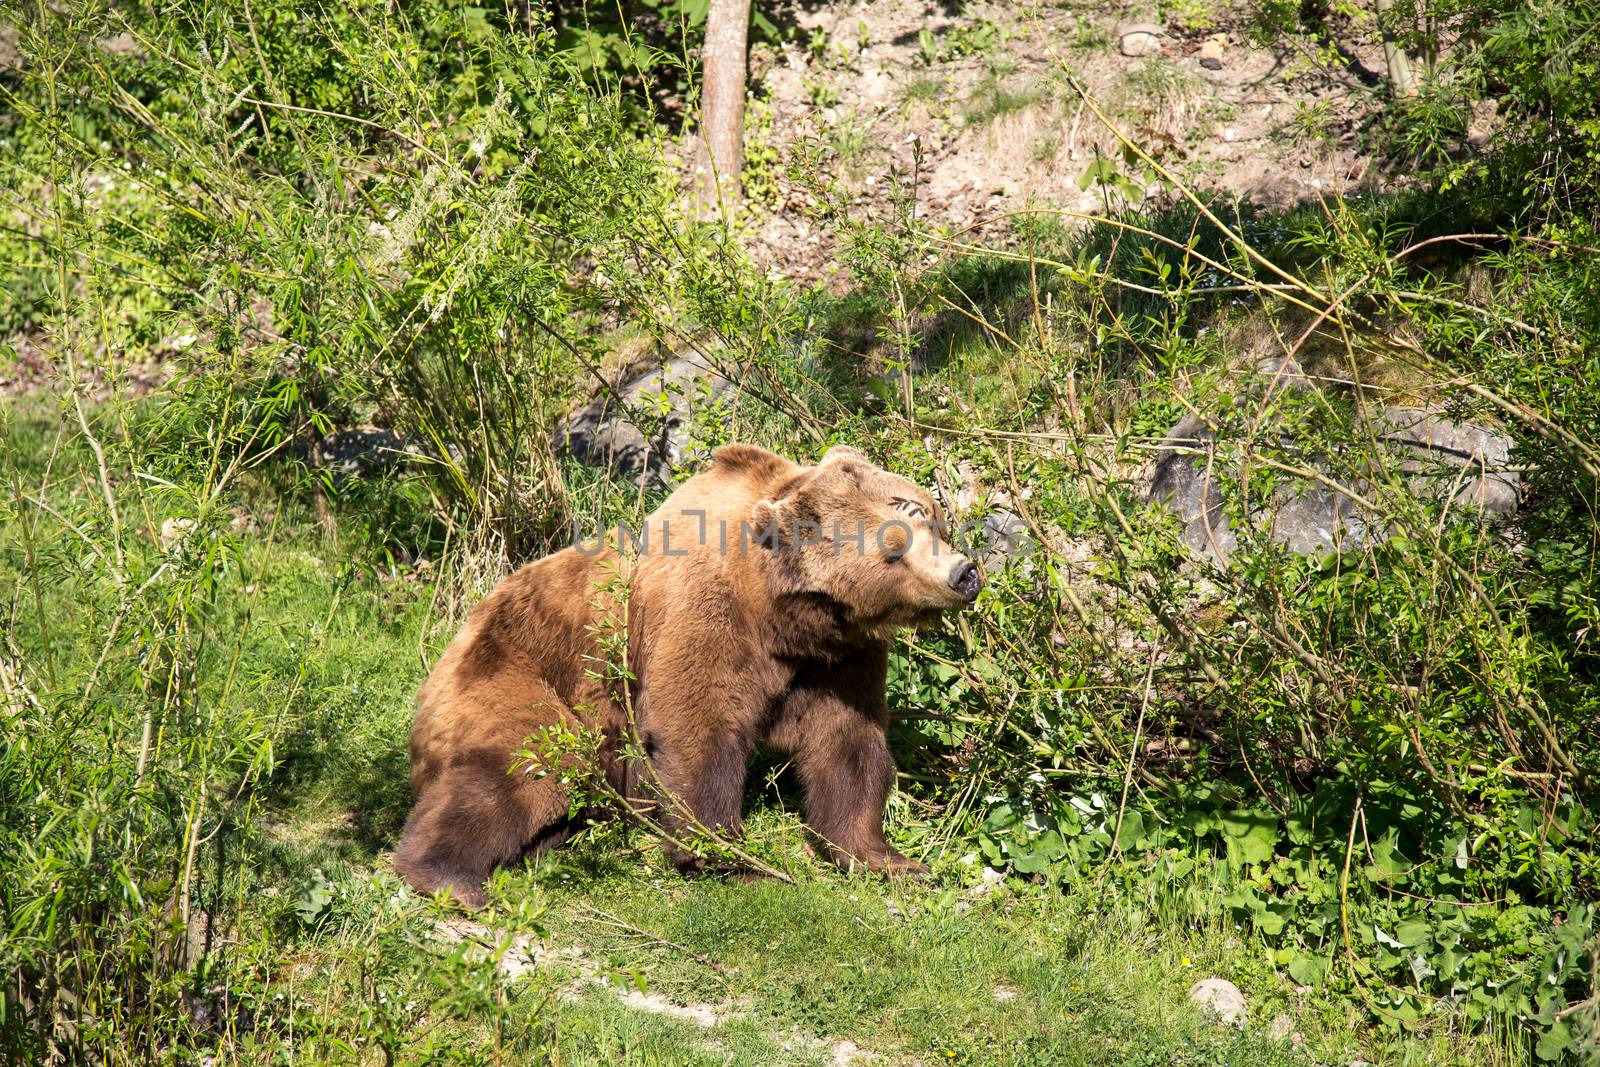 A brown bear in the Bear Park in the swiss city of Bern.